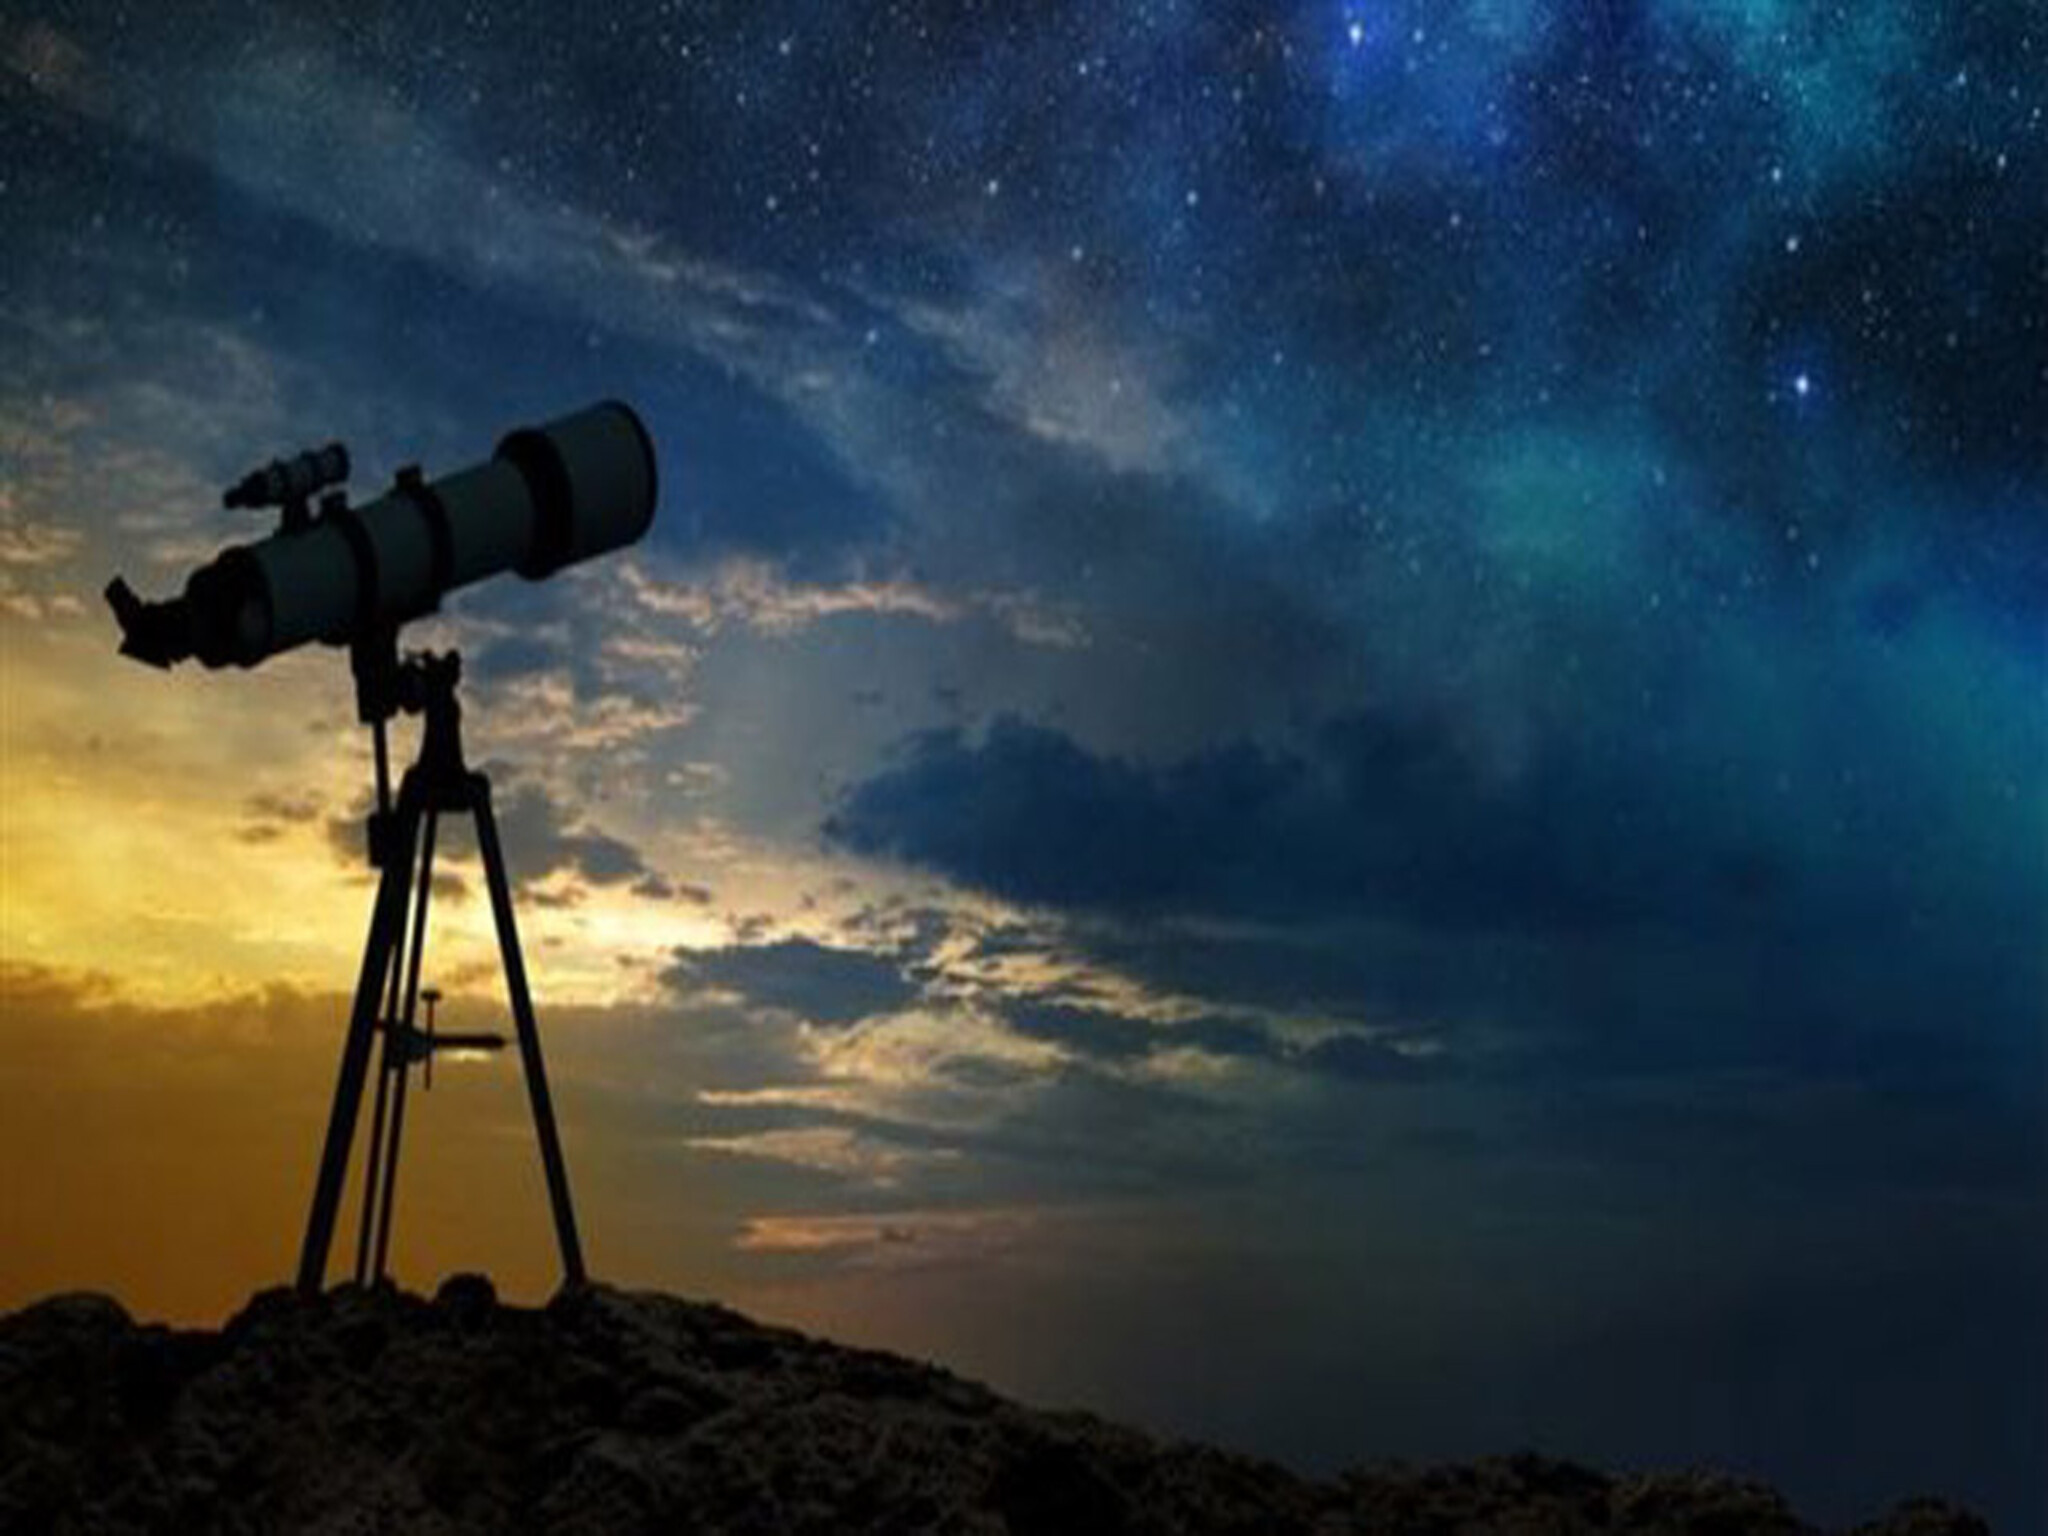 The Astronomy Institute announces the first day of Eid Al-Adha